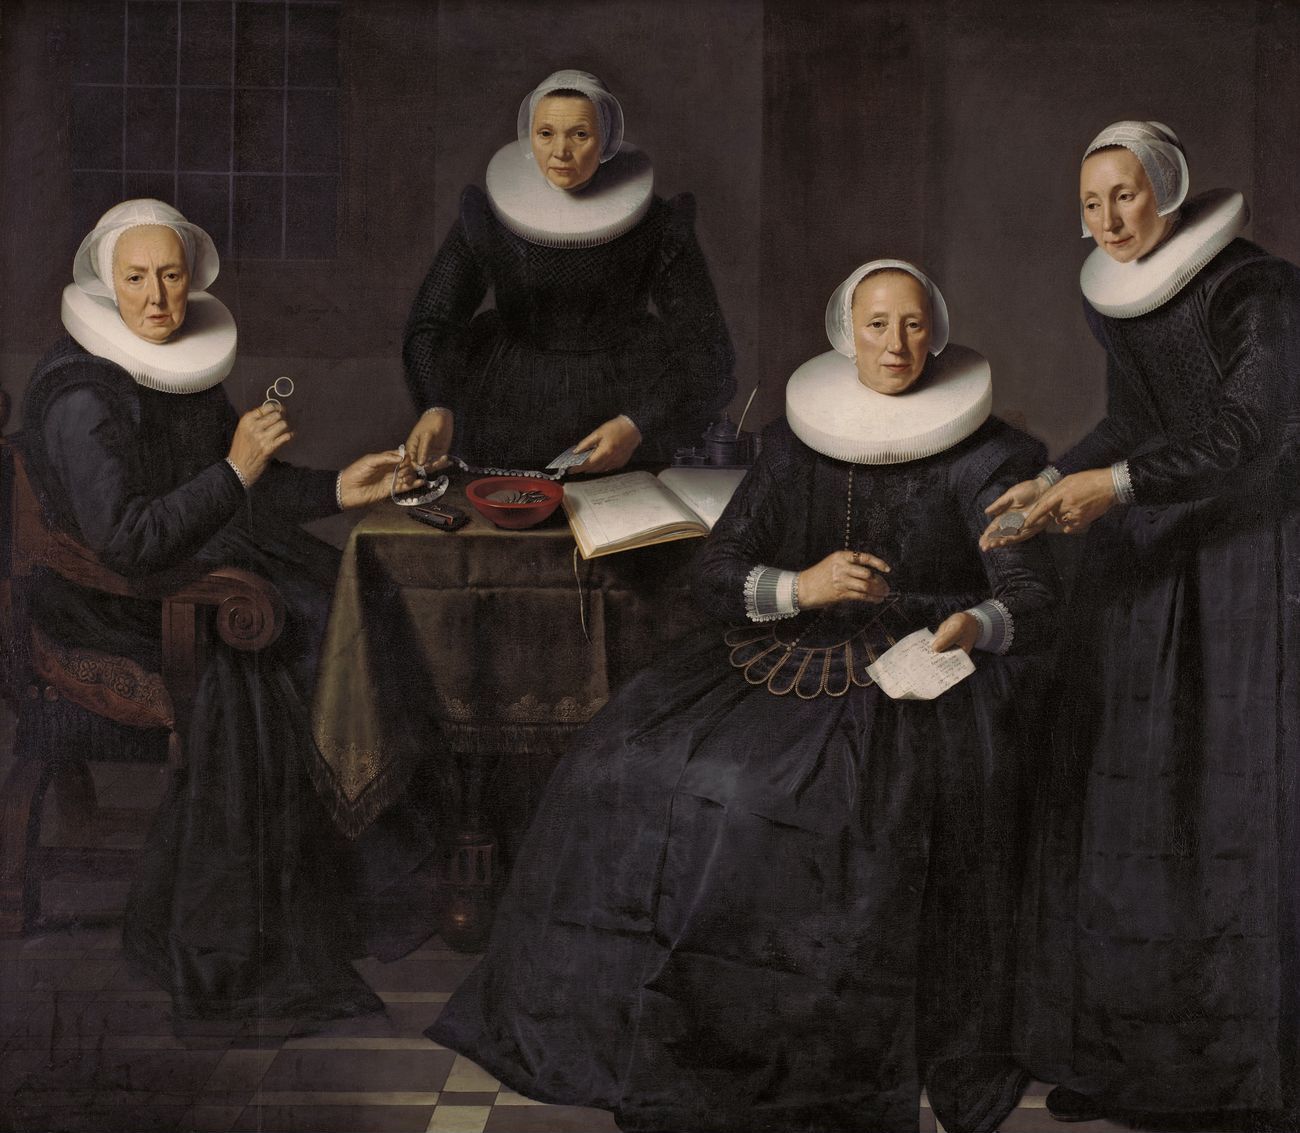 Dick Santvoort, The Governess and Wardresses of the Spinhuis, 1638. Amsterdam Museum